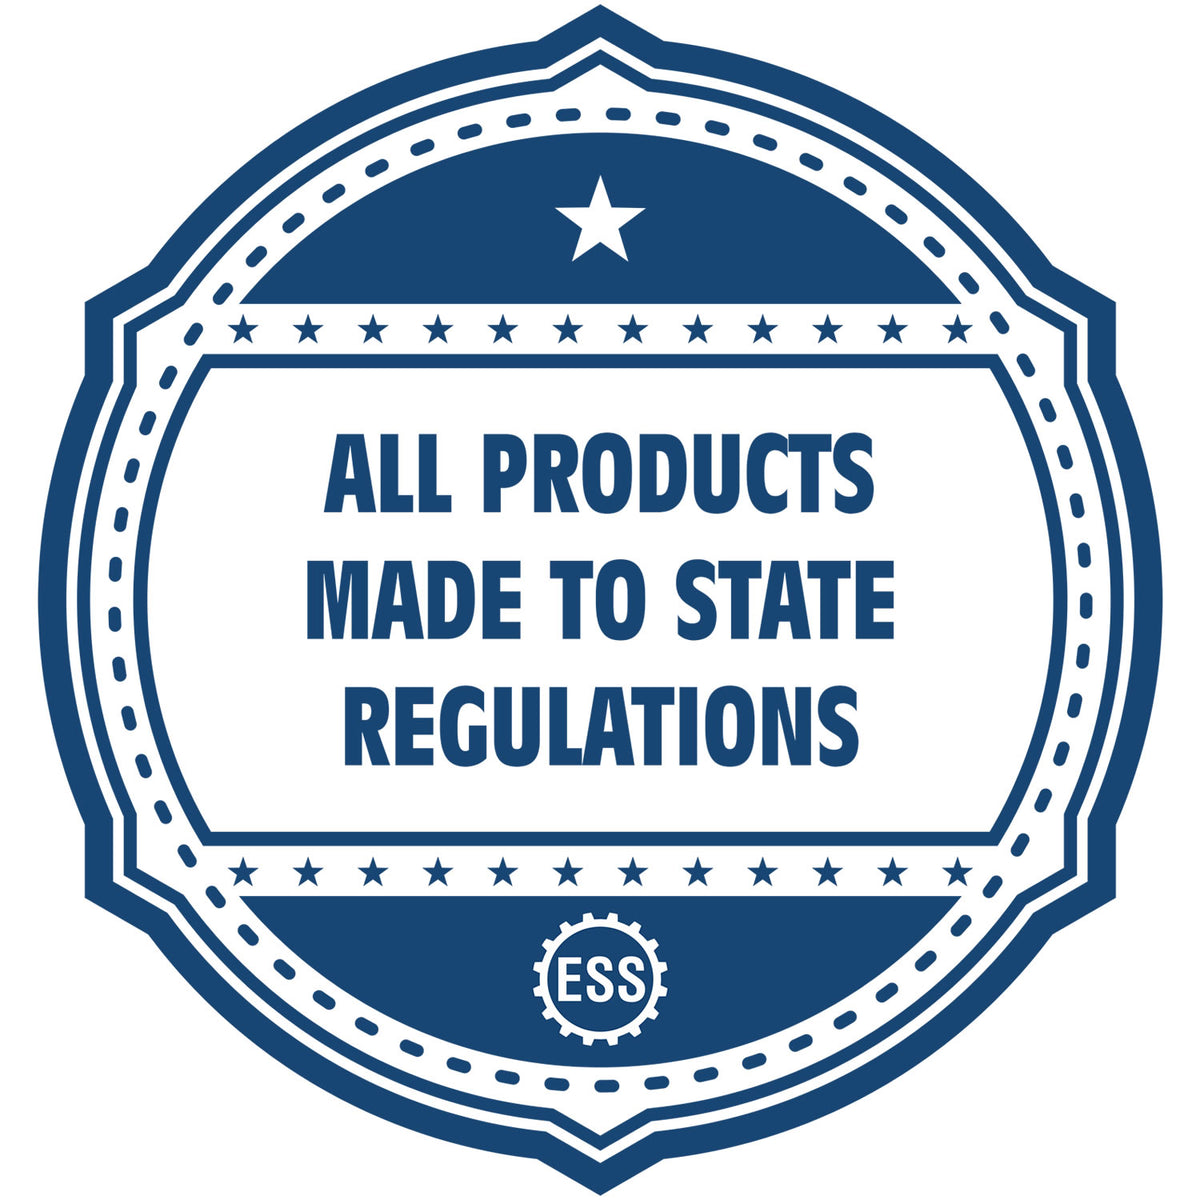 An icon or badge element for the Digital Kansas Landscape Architect Stamp showing that this product is made in compliance with state regulations.